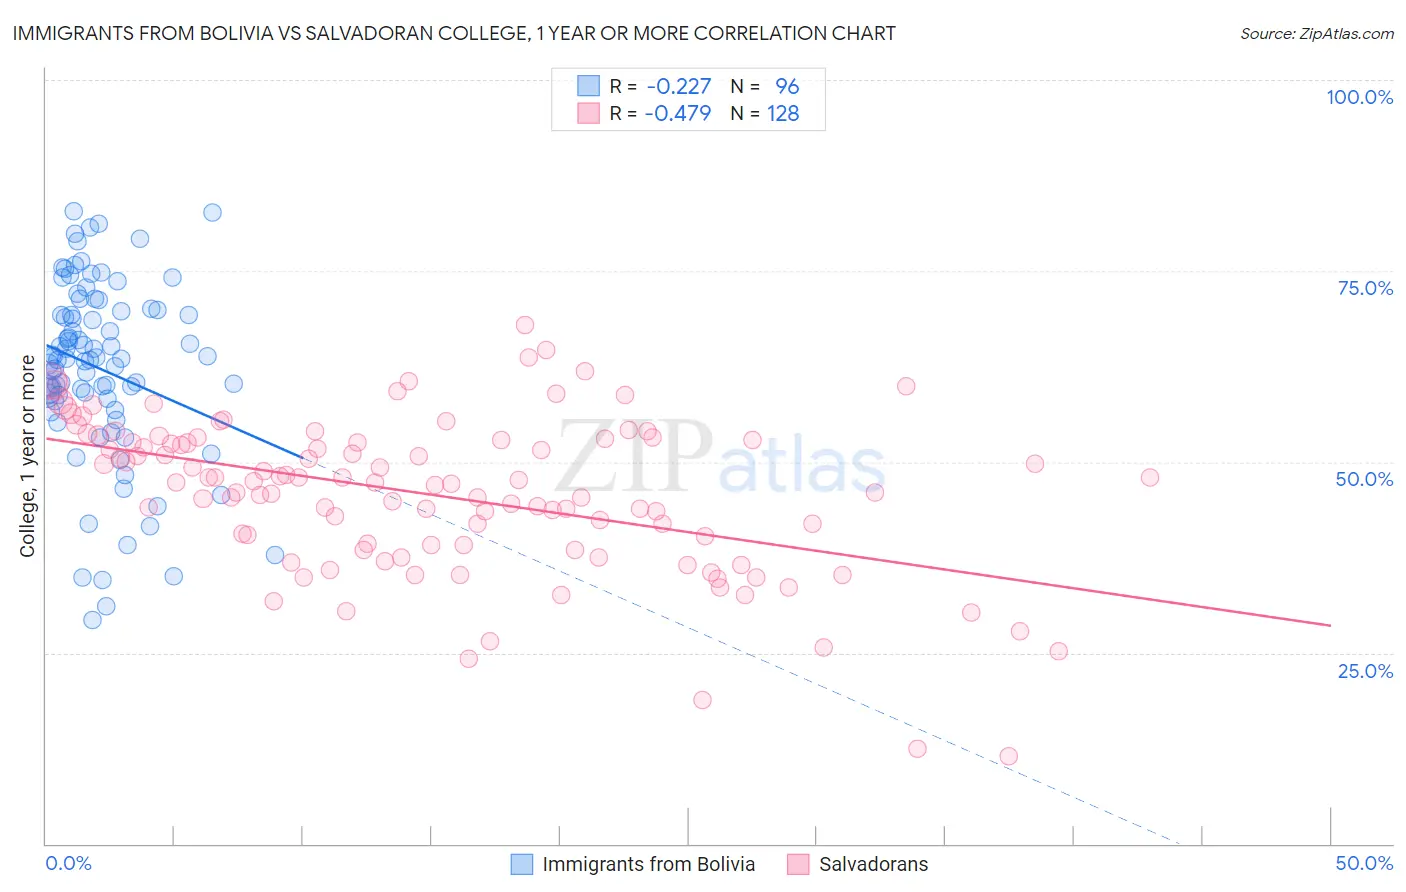 Immigrants from Bolivia vs Salvadoran College, 1 year or more